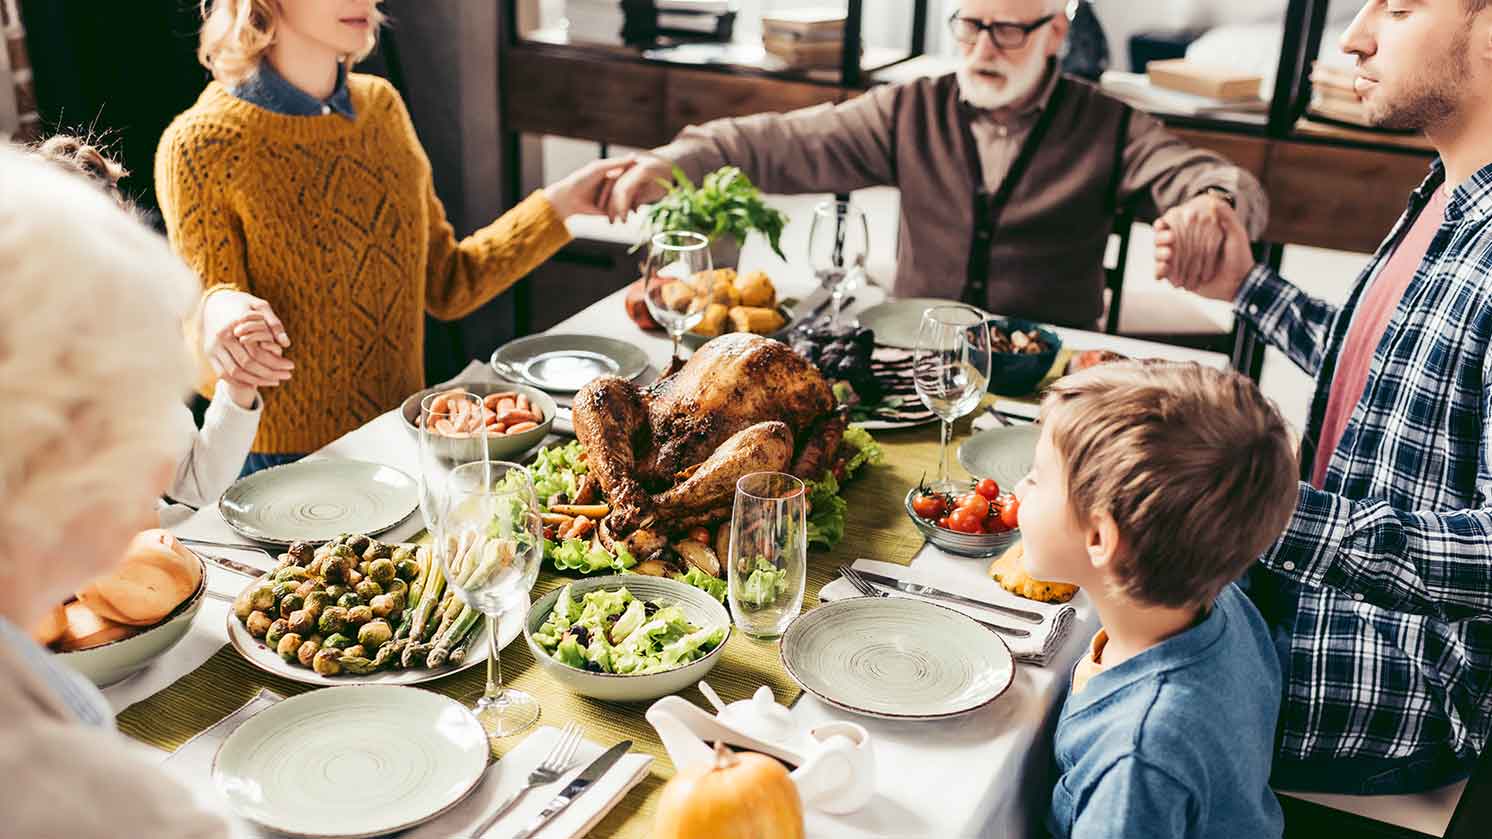 5 Ways I Use the Holidays to Reinforce Our Family Values